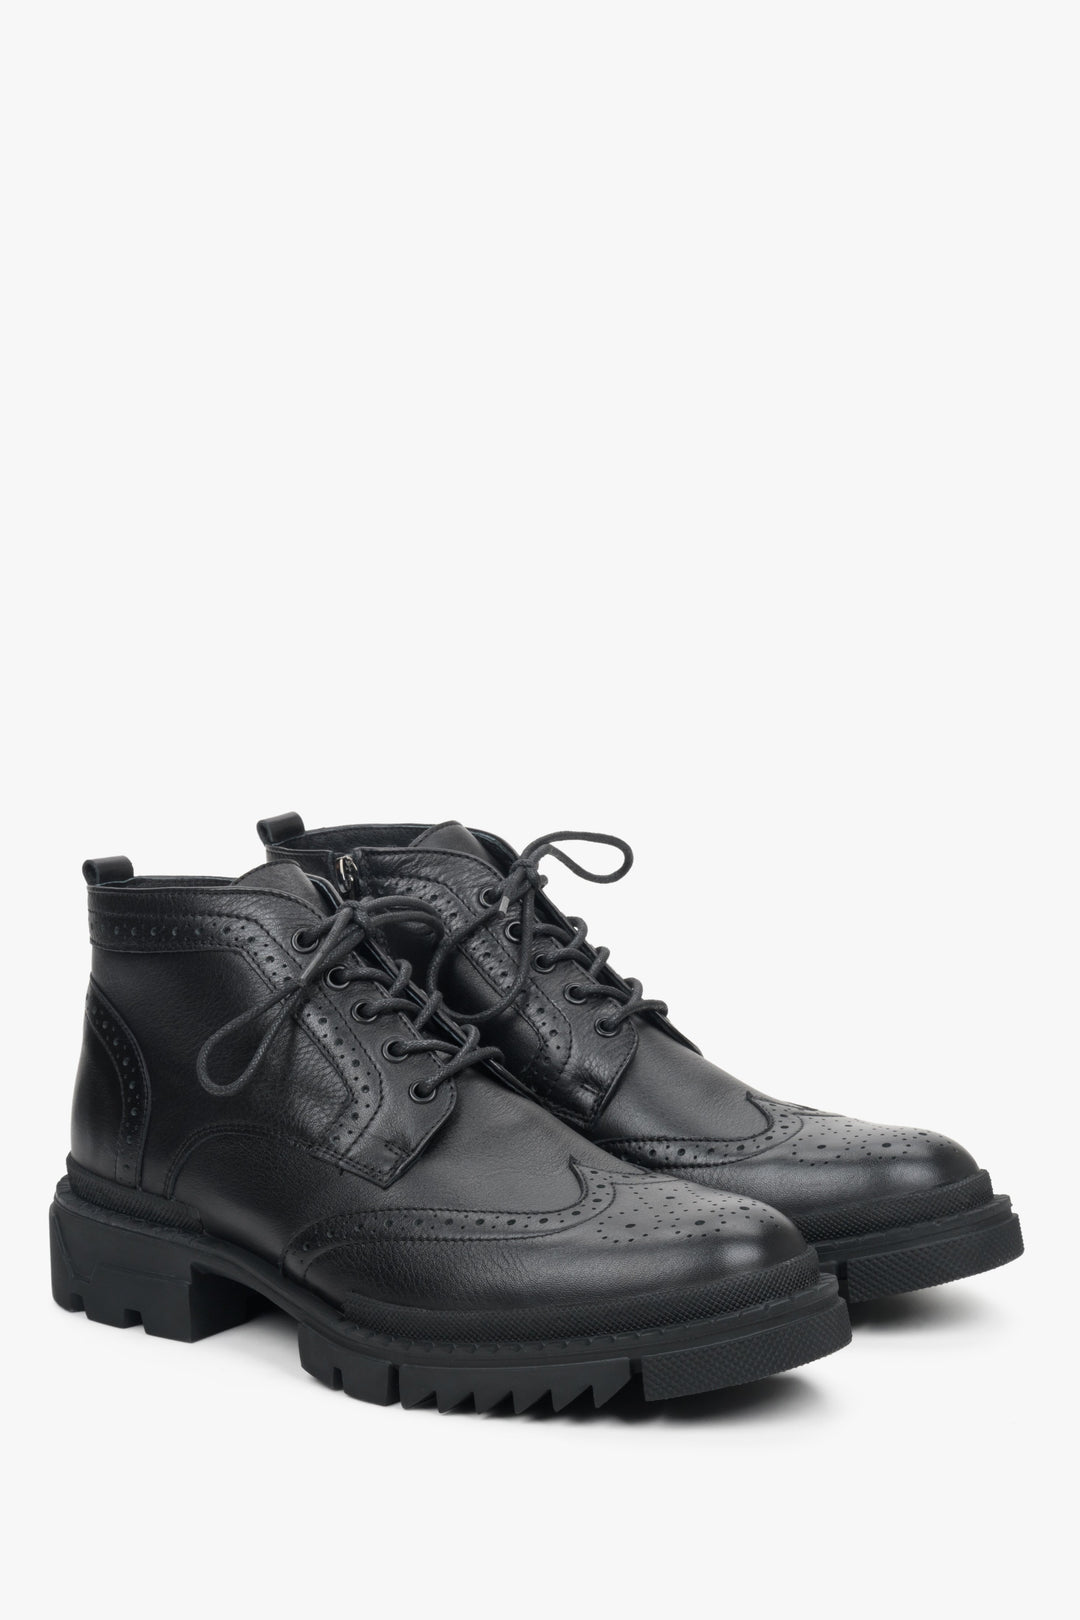 Elevated men's winter lace-up boots made from genuine black leather by Estro.